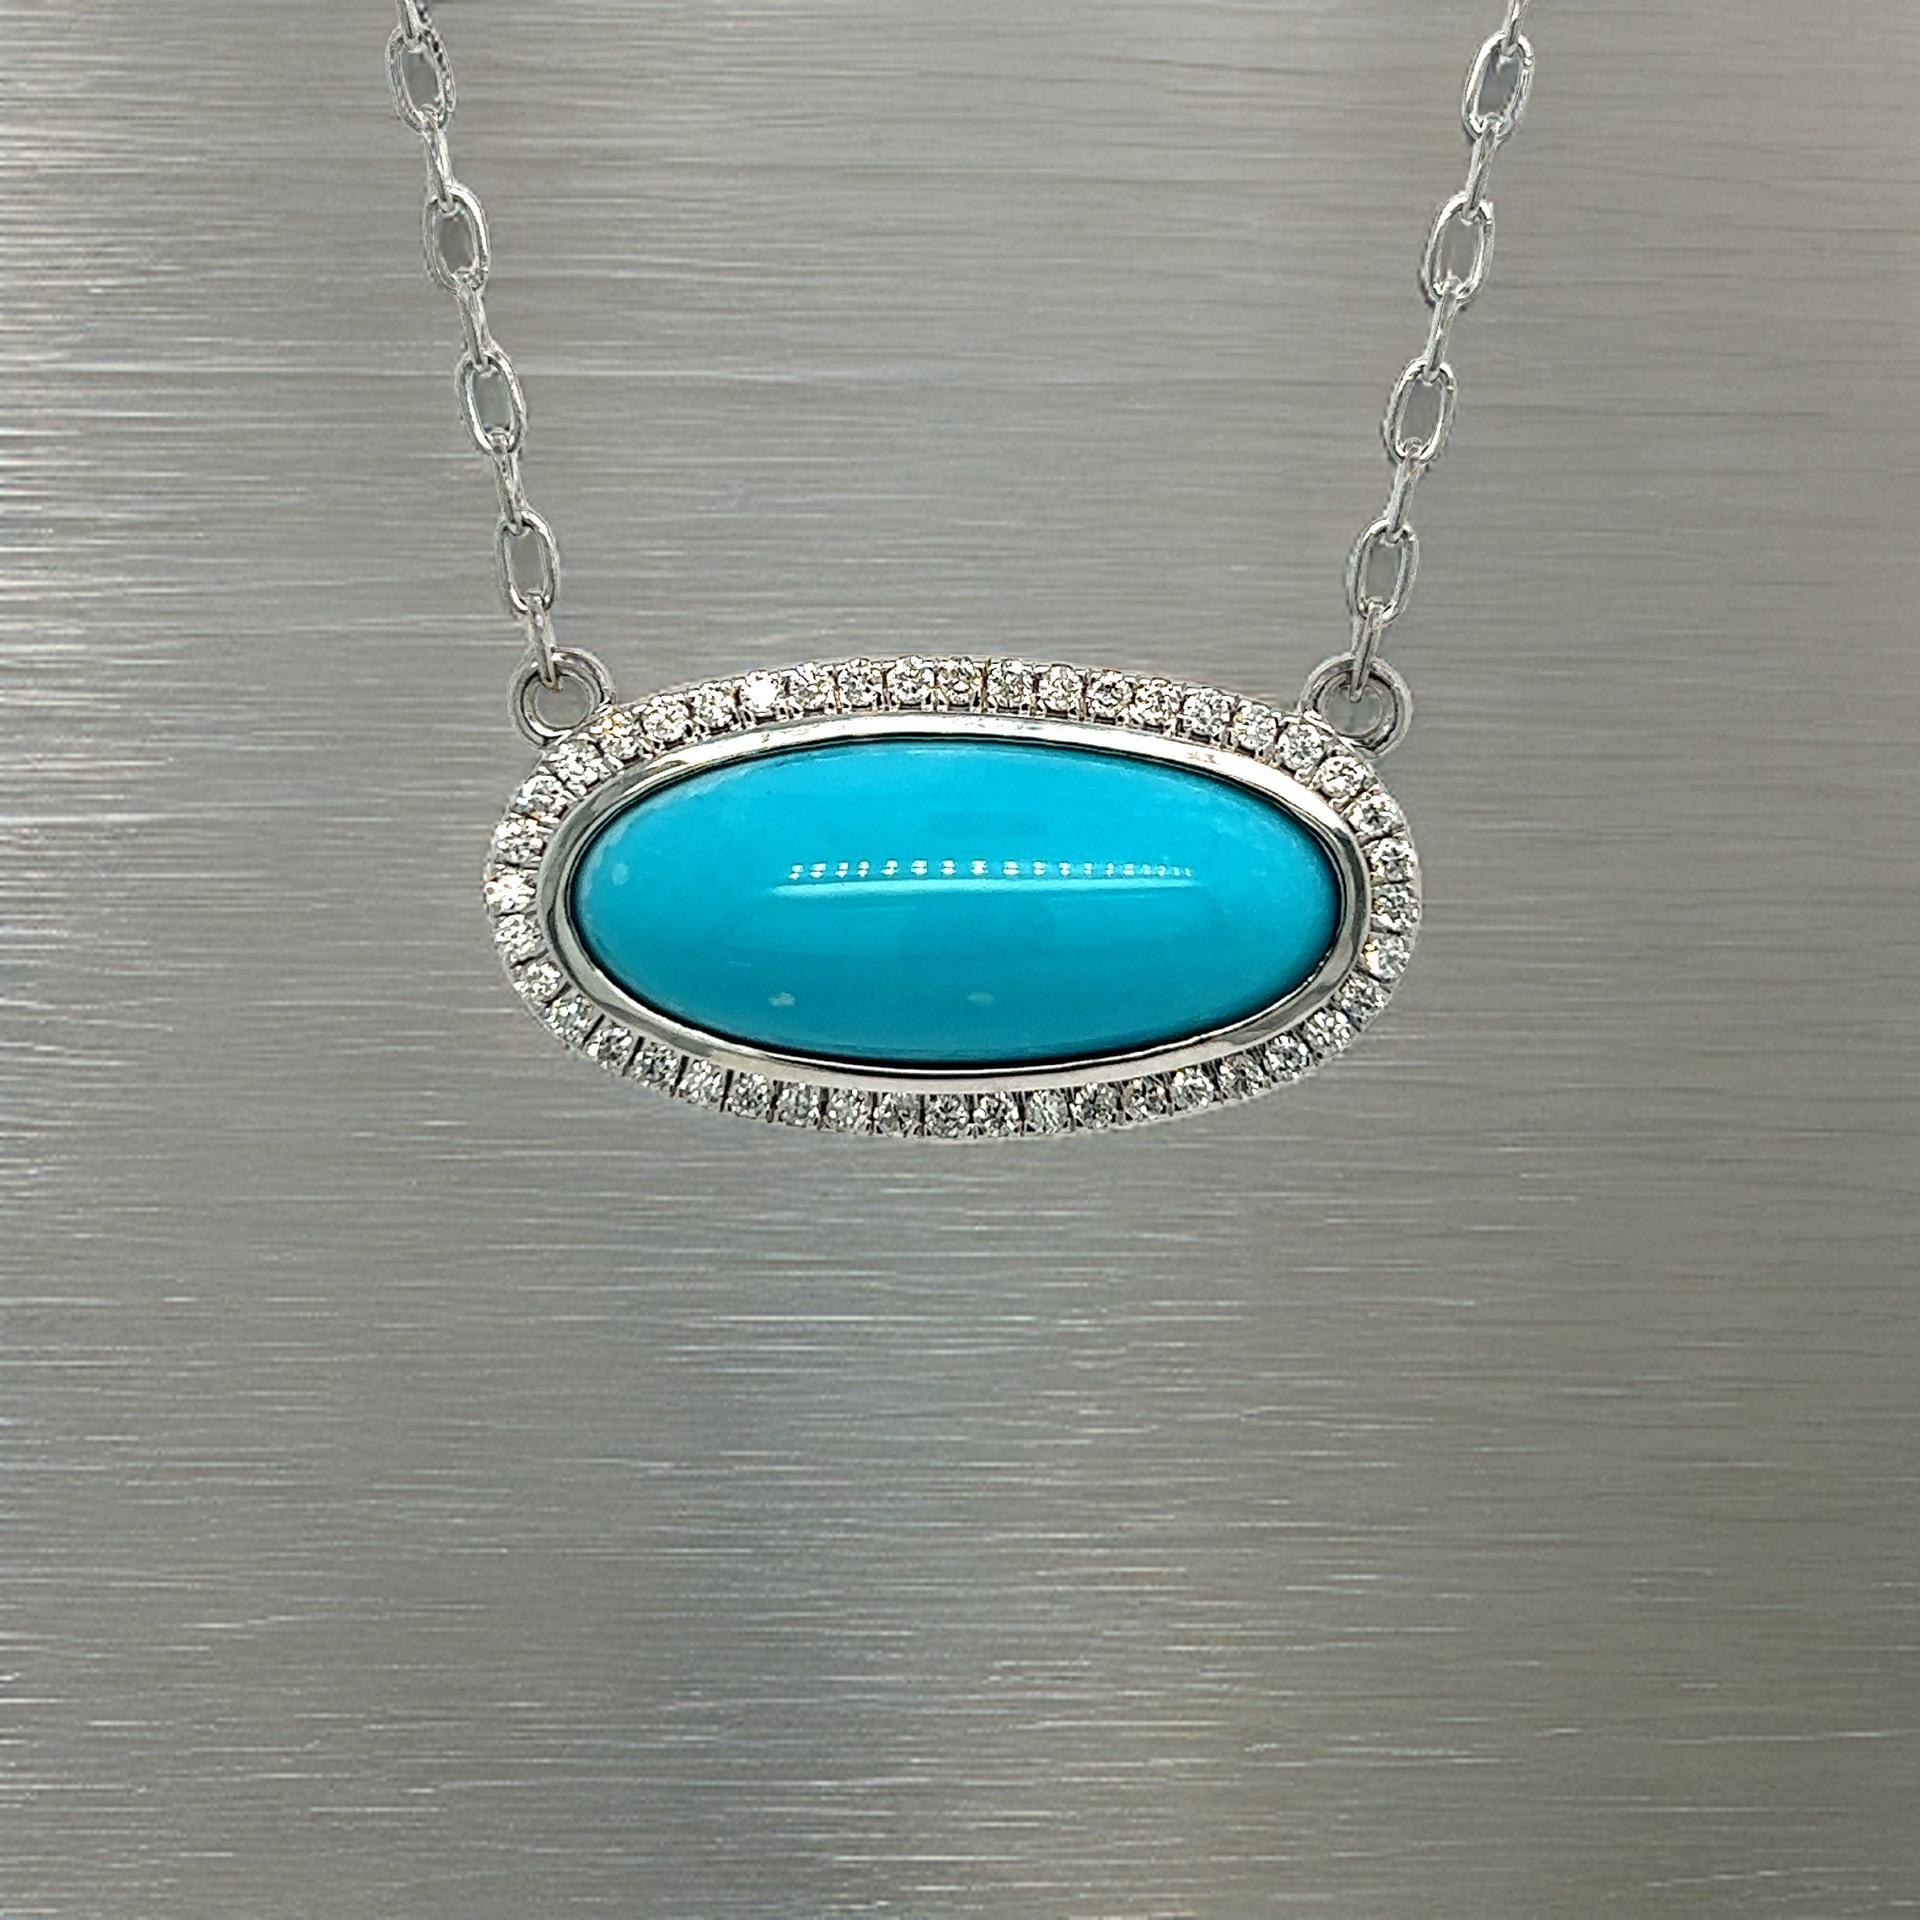 Oval Cut Natural Persian Turquoise Diamond Pendant Necklace 17